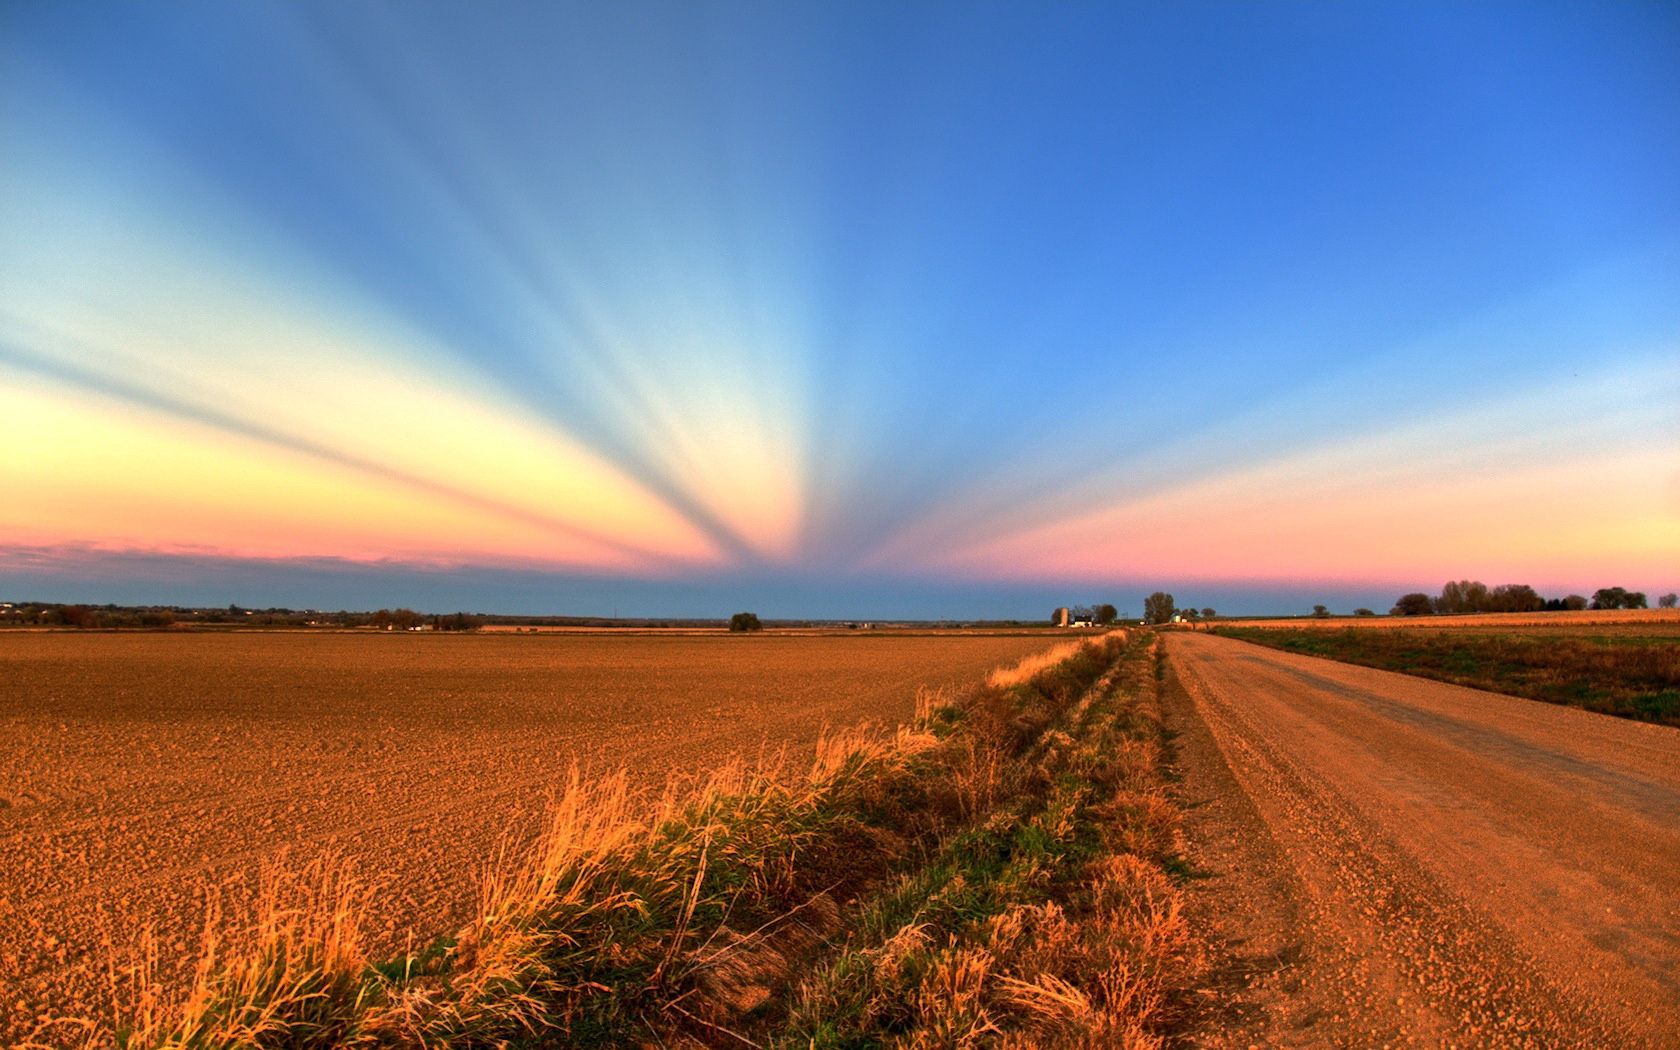 sunset, nature, beams, rays, road, field, evening, agriculture, crops